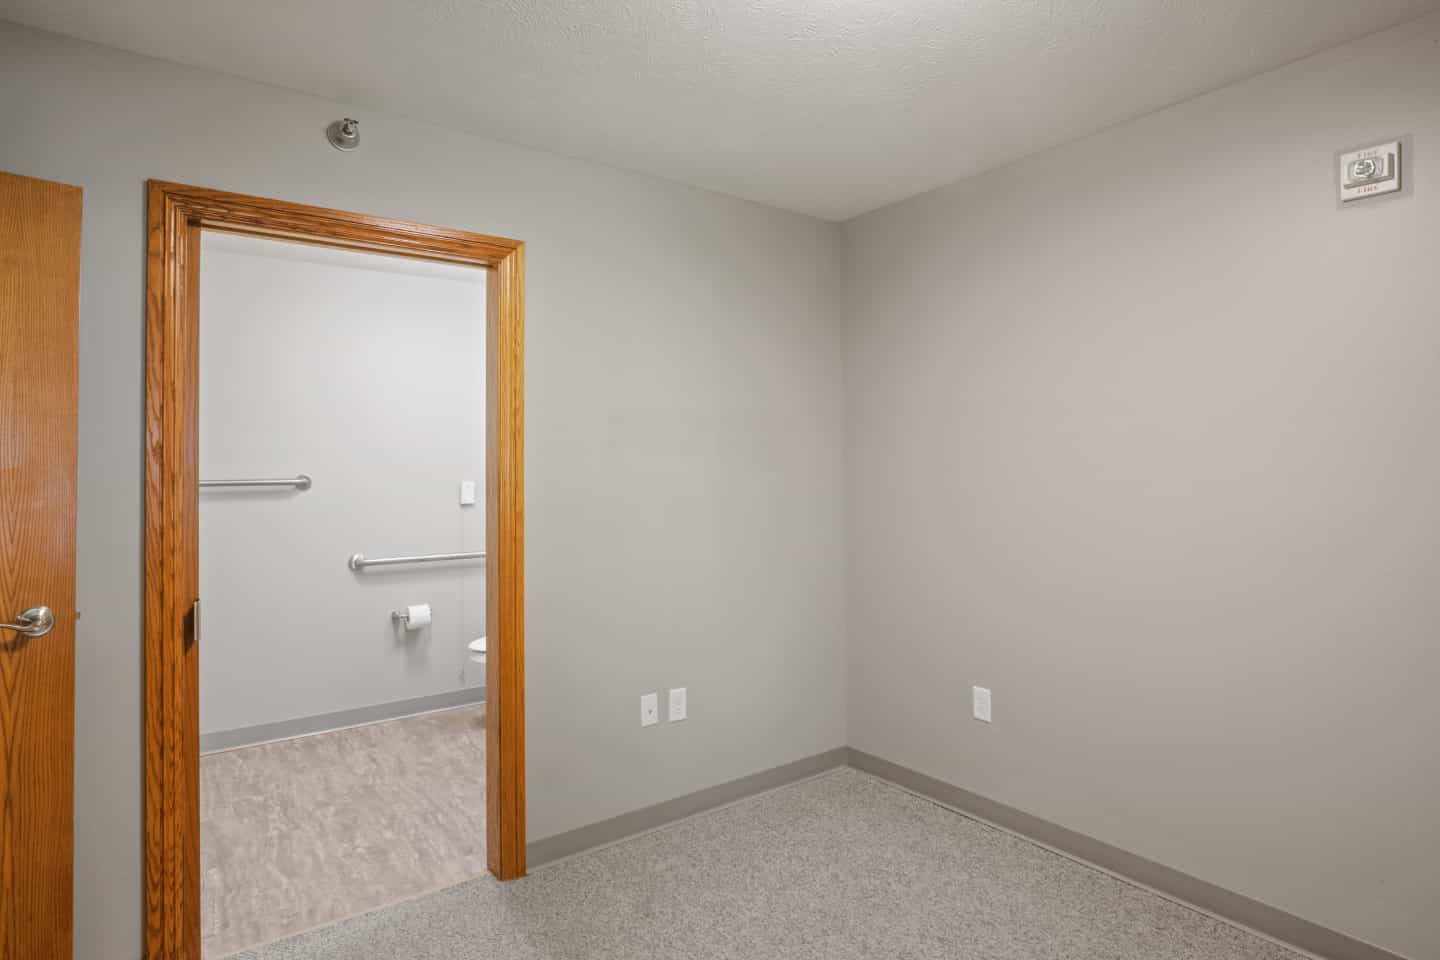 Assisted Living - Two Bedroom Bedroom